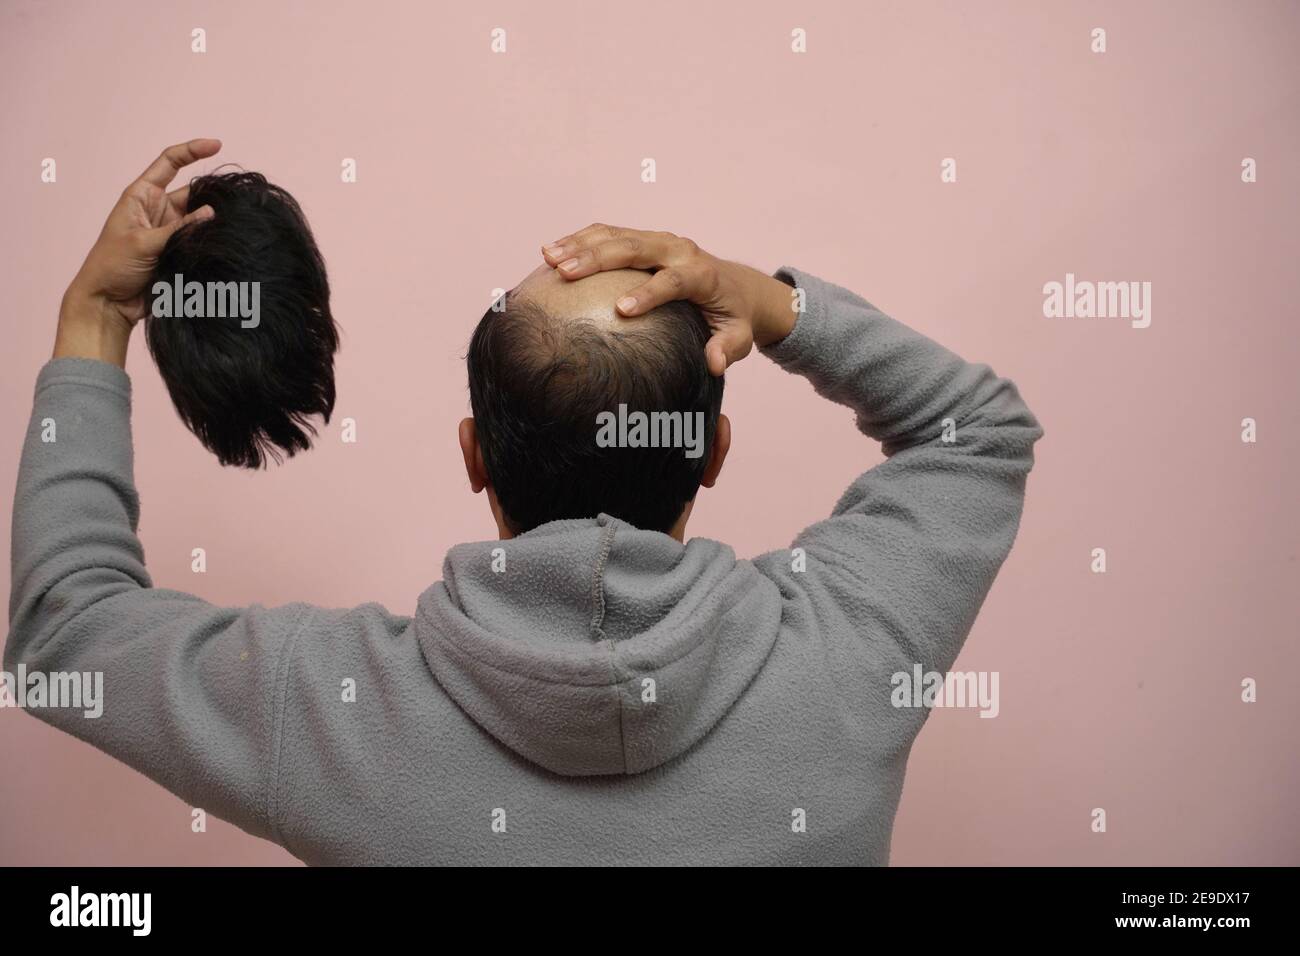 Closeup of a half-bald male removing his wig while wearing a hoodie with a pink background Stock Photo